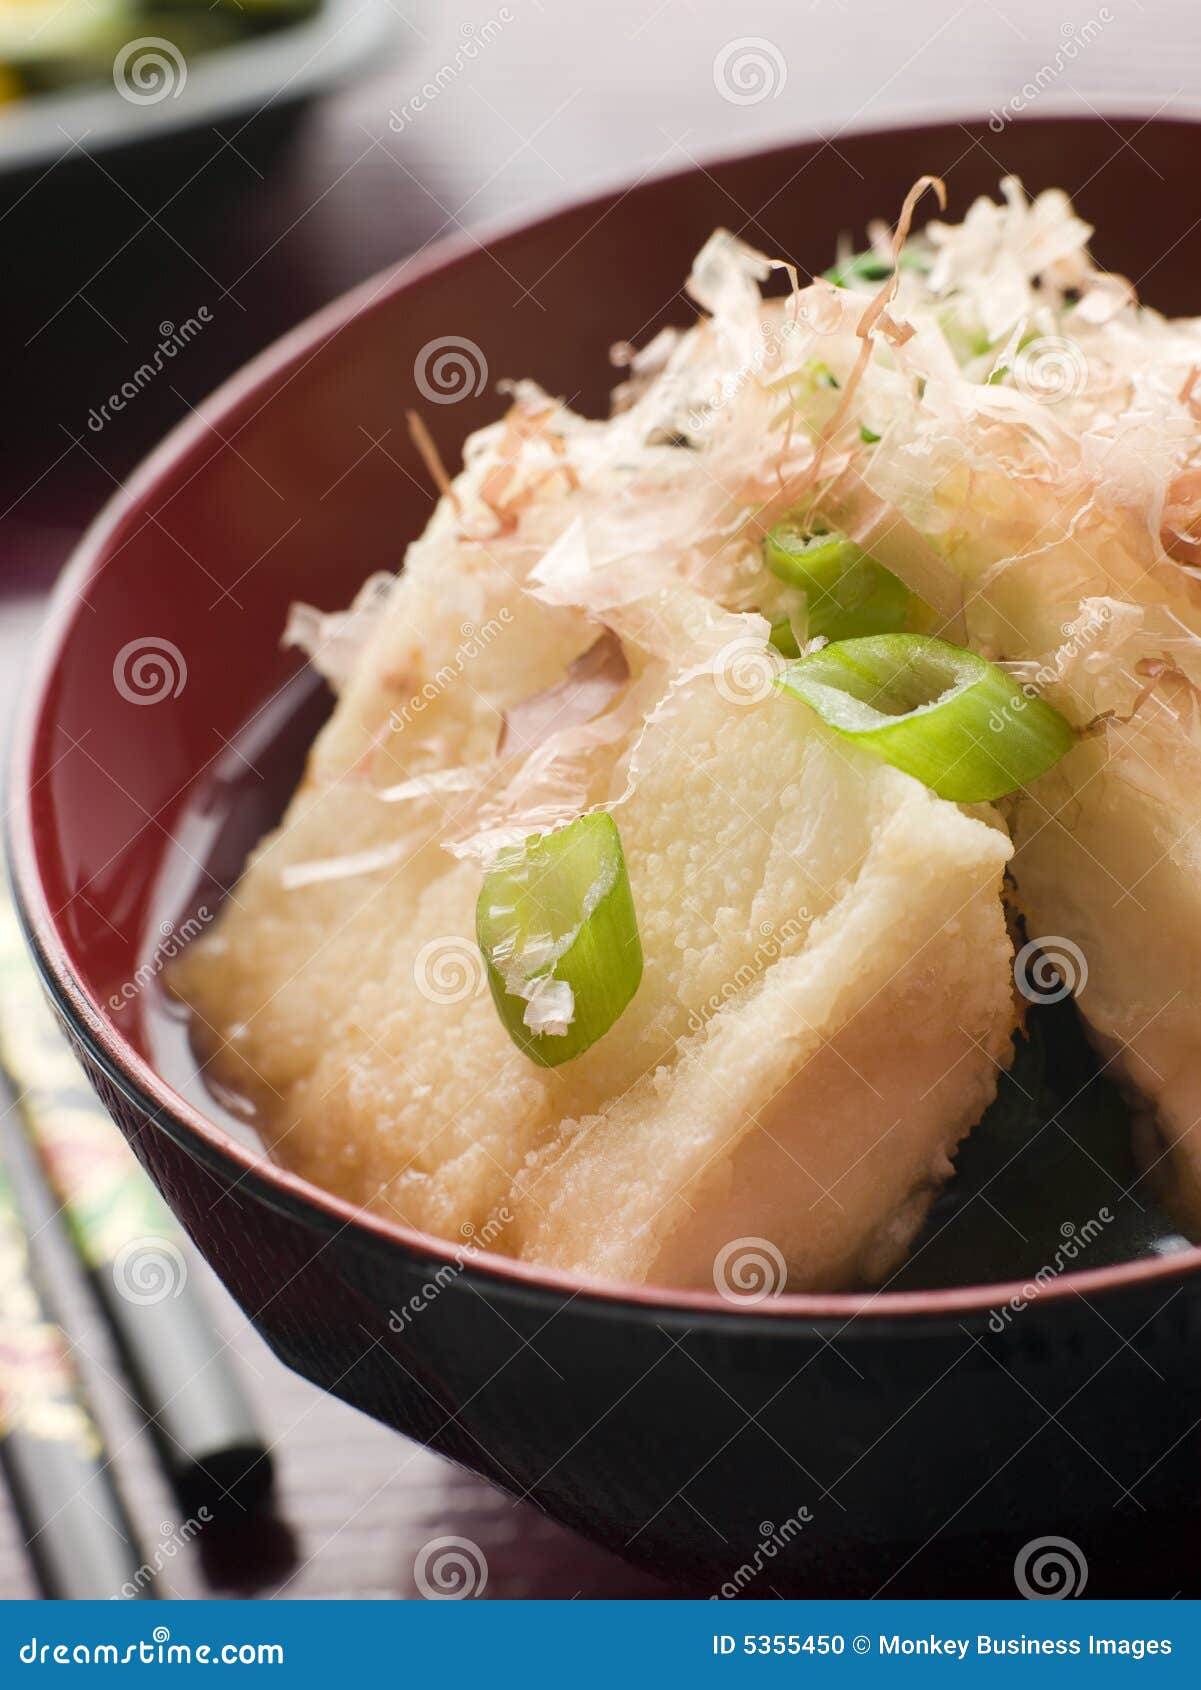 crisp fried tofu in miso with bonito flakes and pi